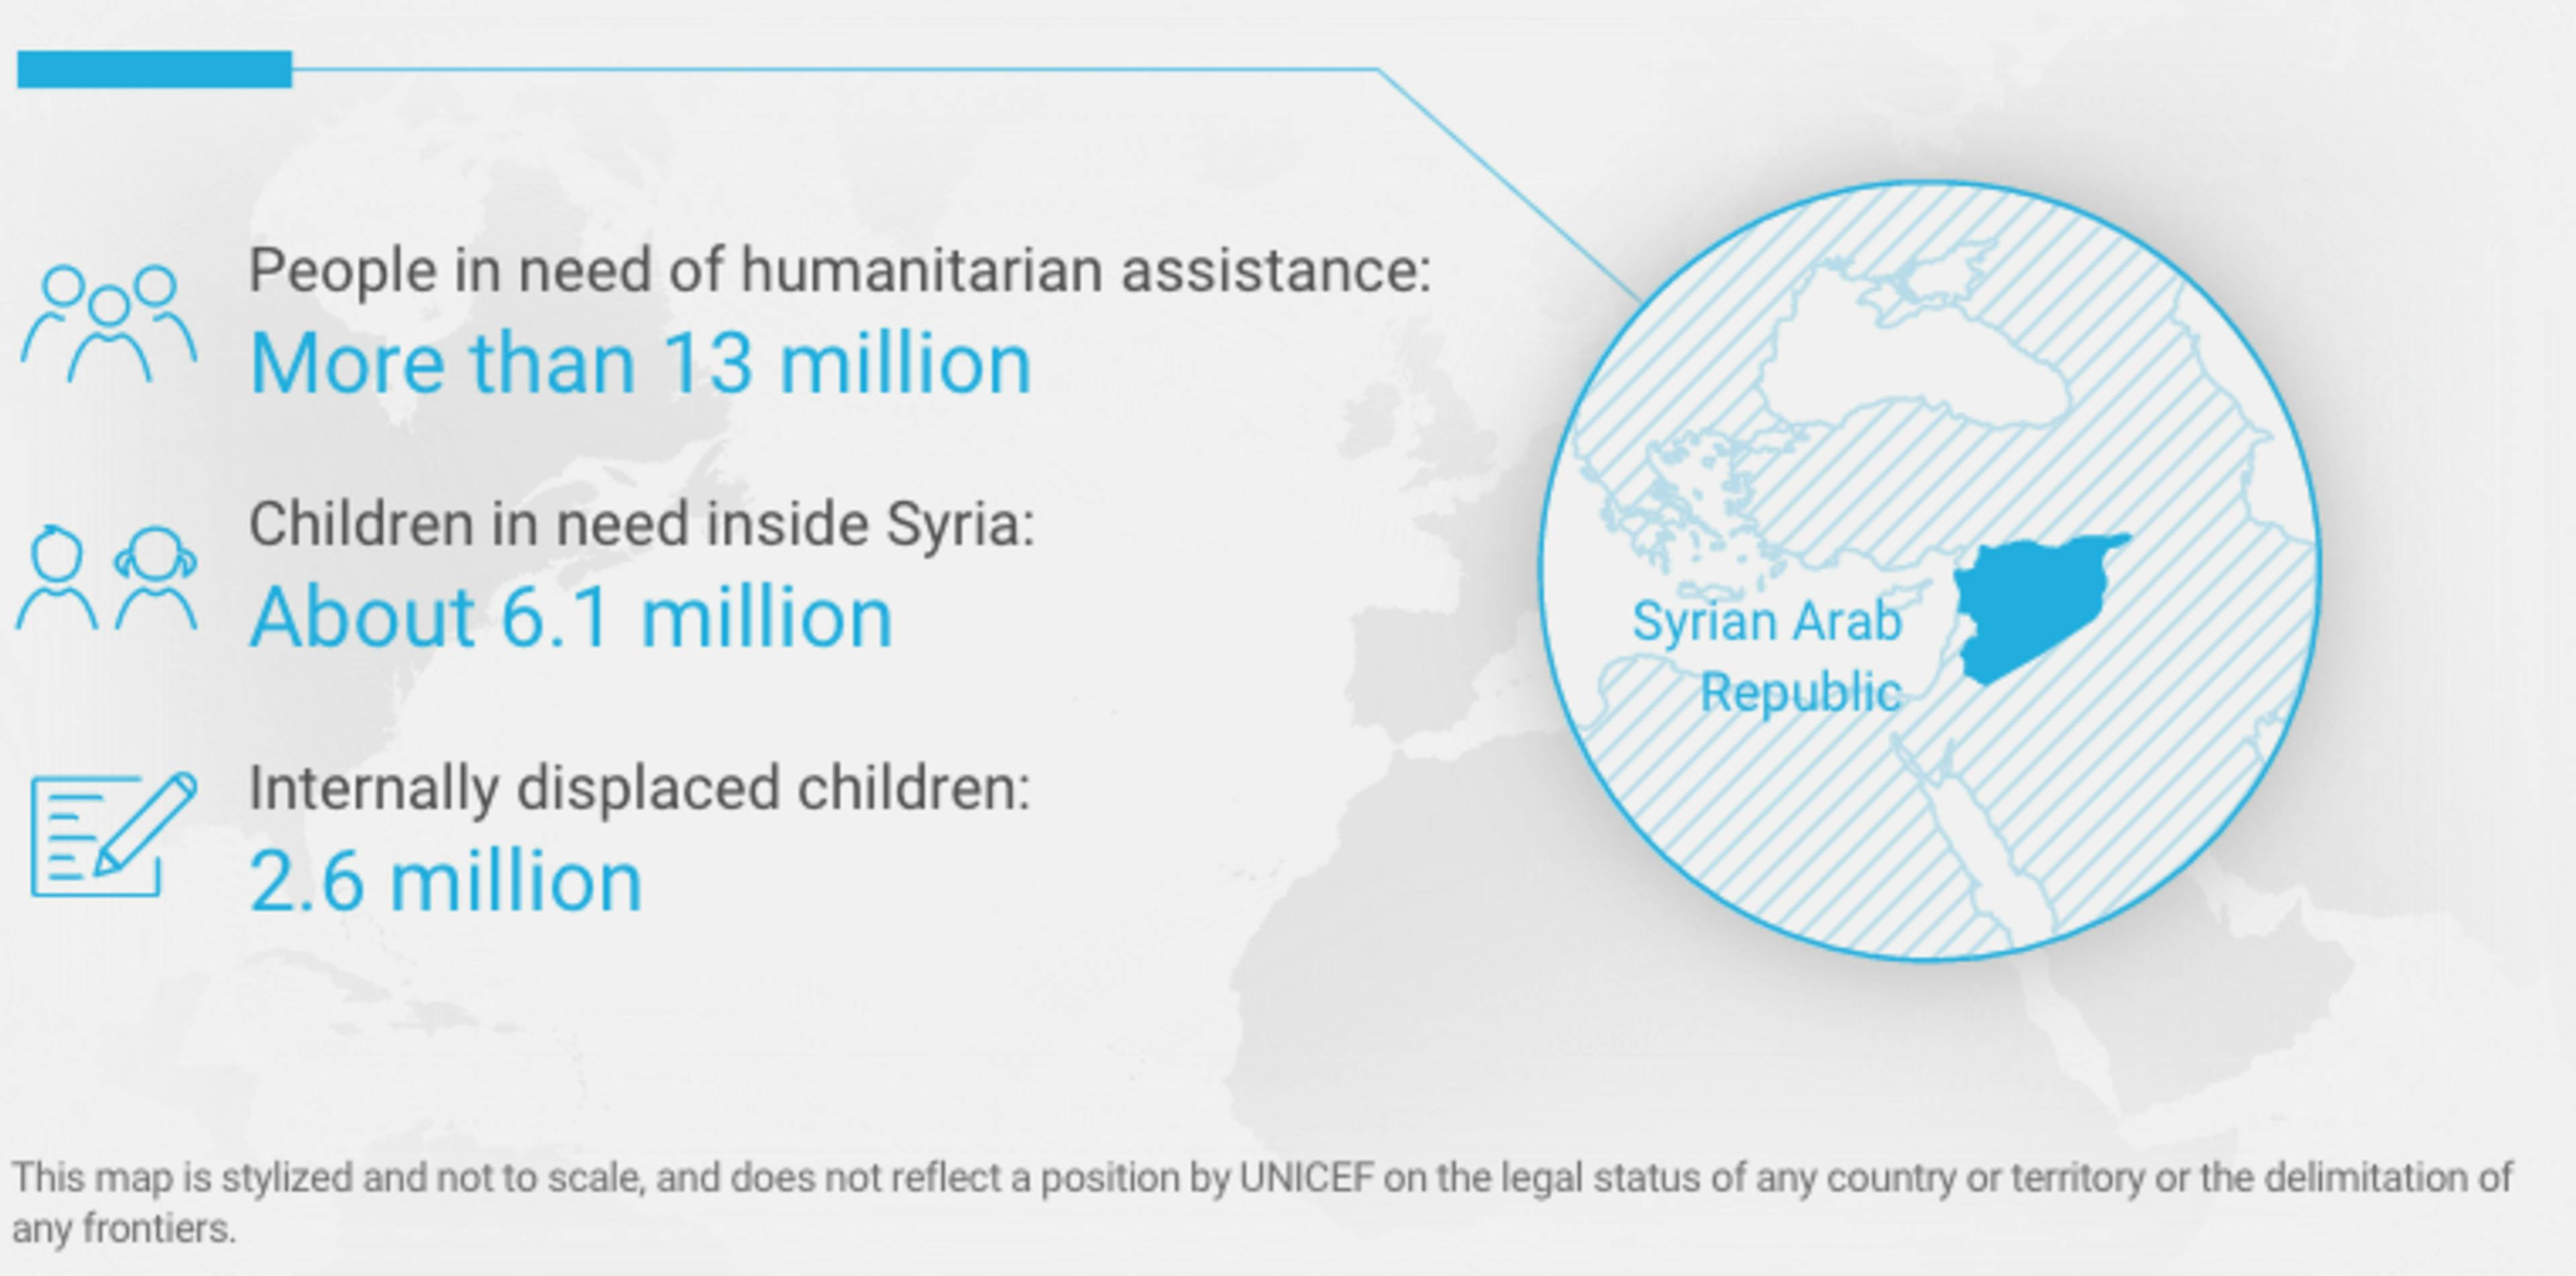 An infographic representing the situation in Syria created by UNICEF